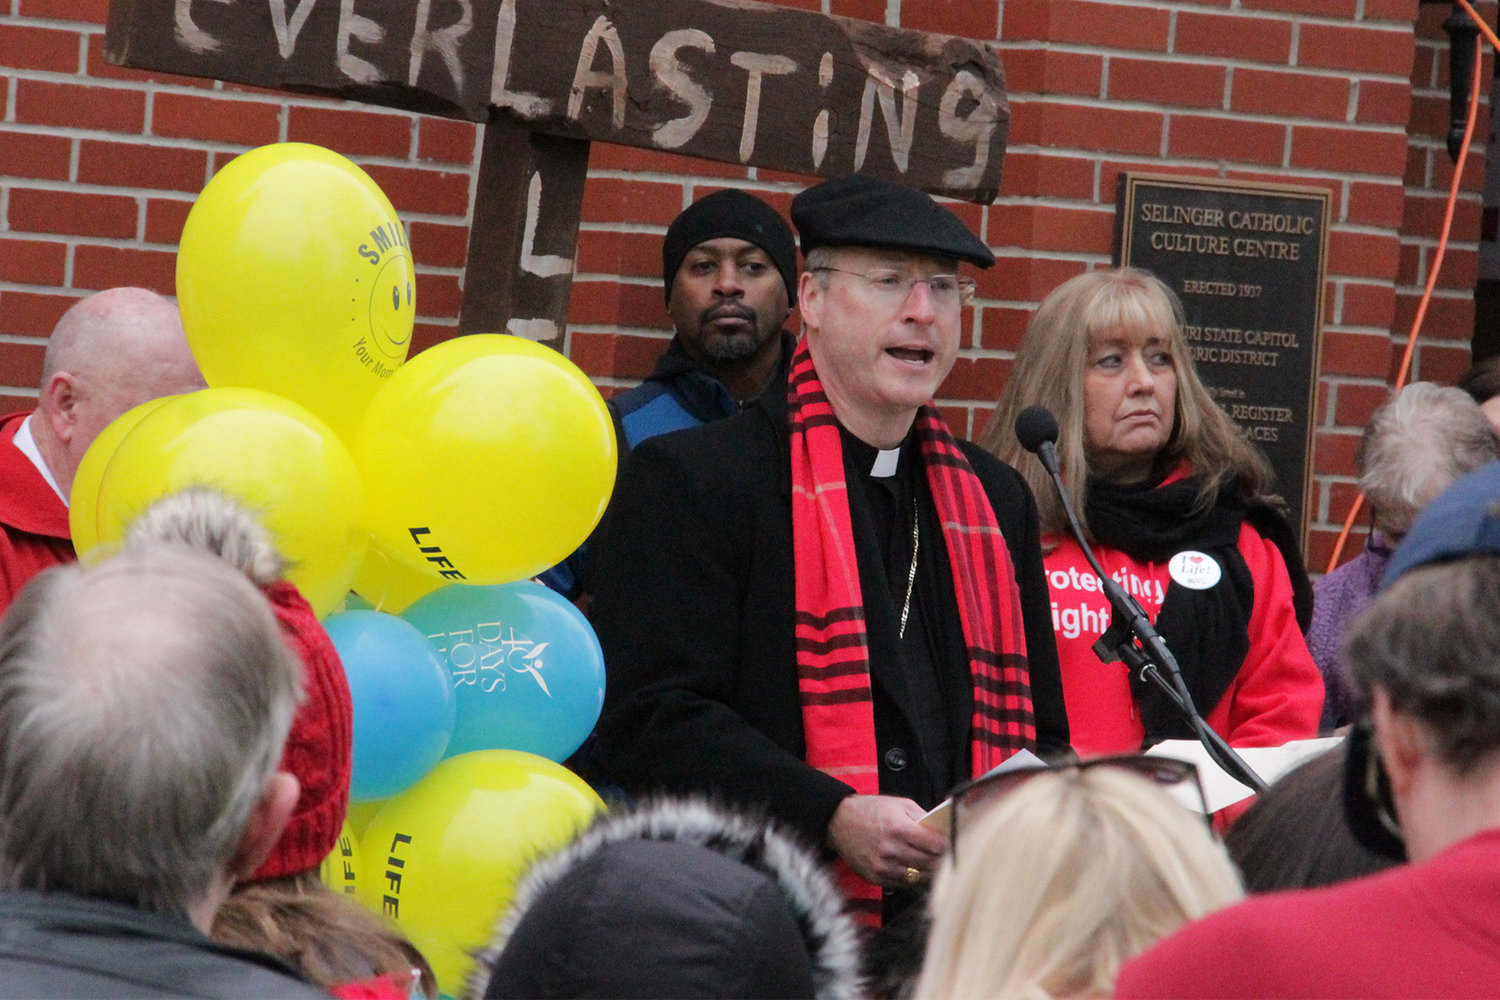 Bishop W. Shawn McKnight speaks at a pre-march rally outside the Selinger Centre at St. Peter Church during the Midwest March for Life, Feb. 1 in Jefferson City.